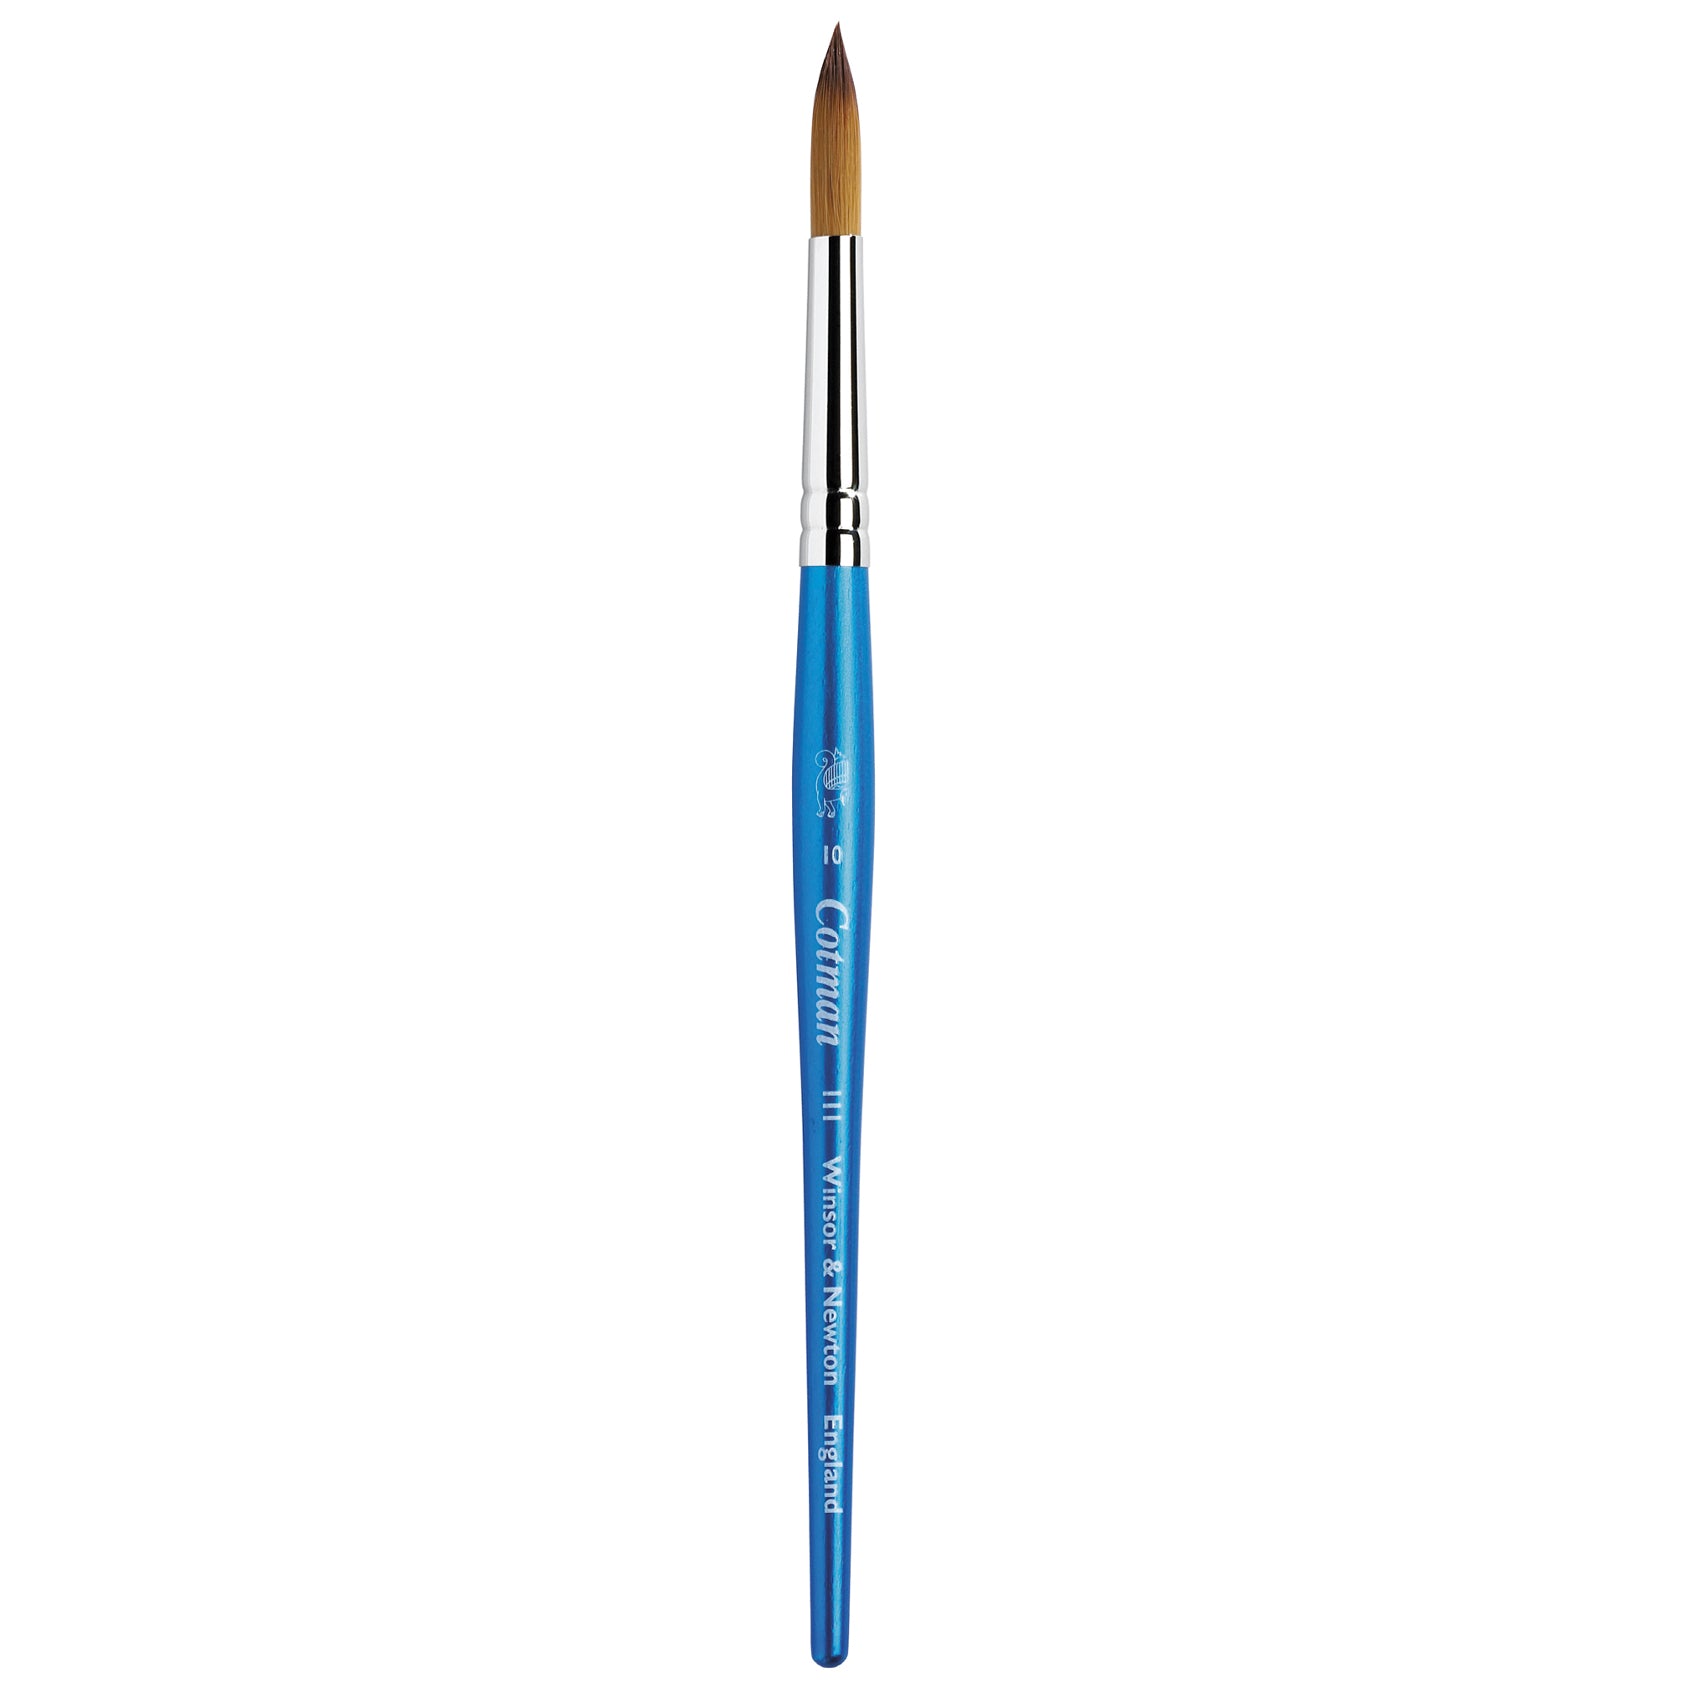 The Cotman Series 111 is for fine detail, lines and washes. The round is a traditional and popular head shape for all-purpose watercolour work. These brushes can be used for broad strokes but also form a sharp point.